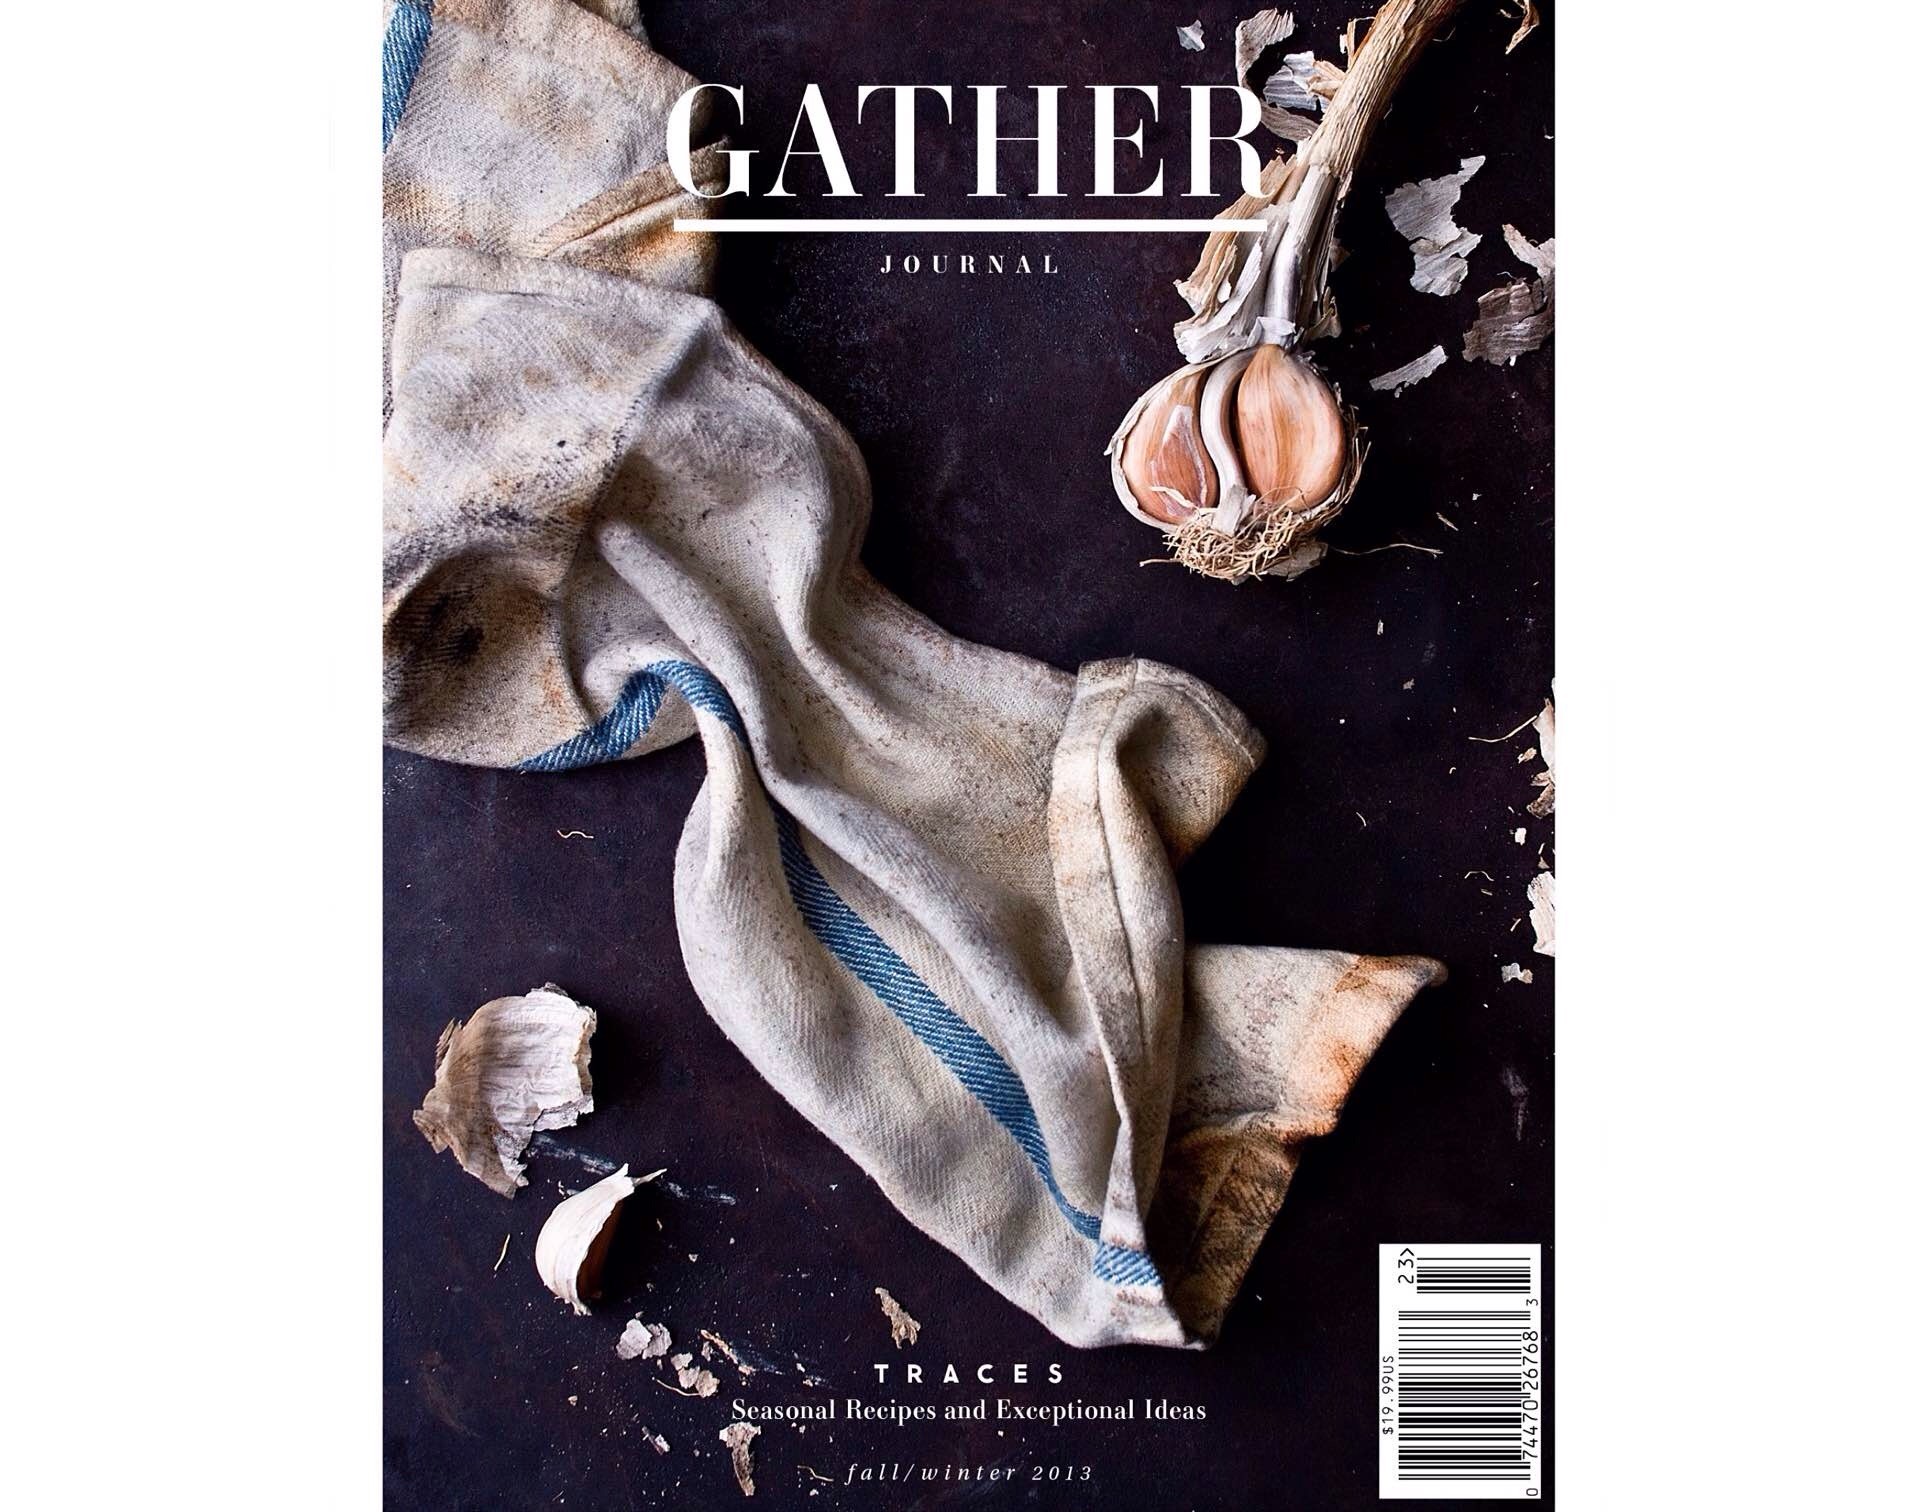 Gather Journal ($20 per issue, $35/year for a subscription)